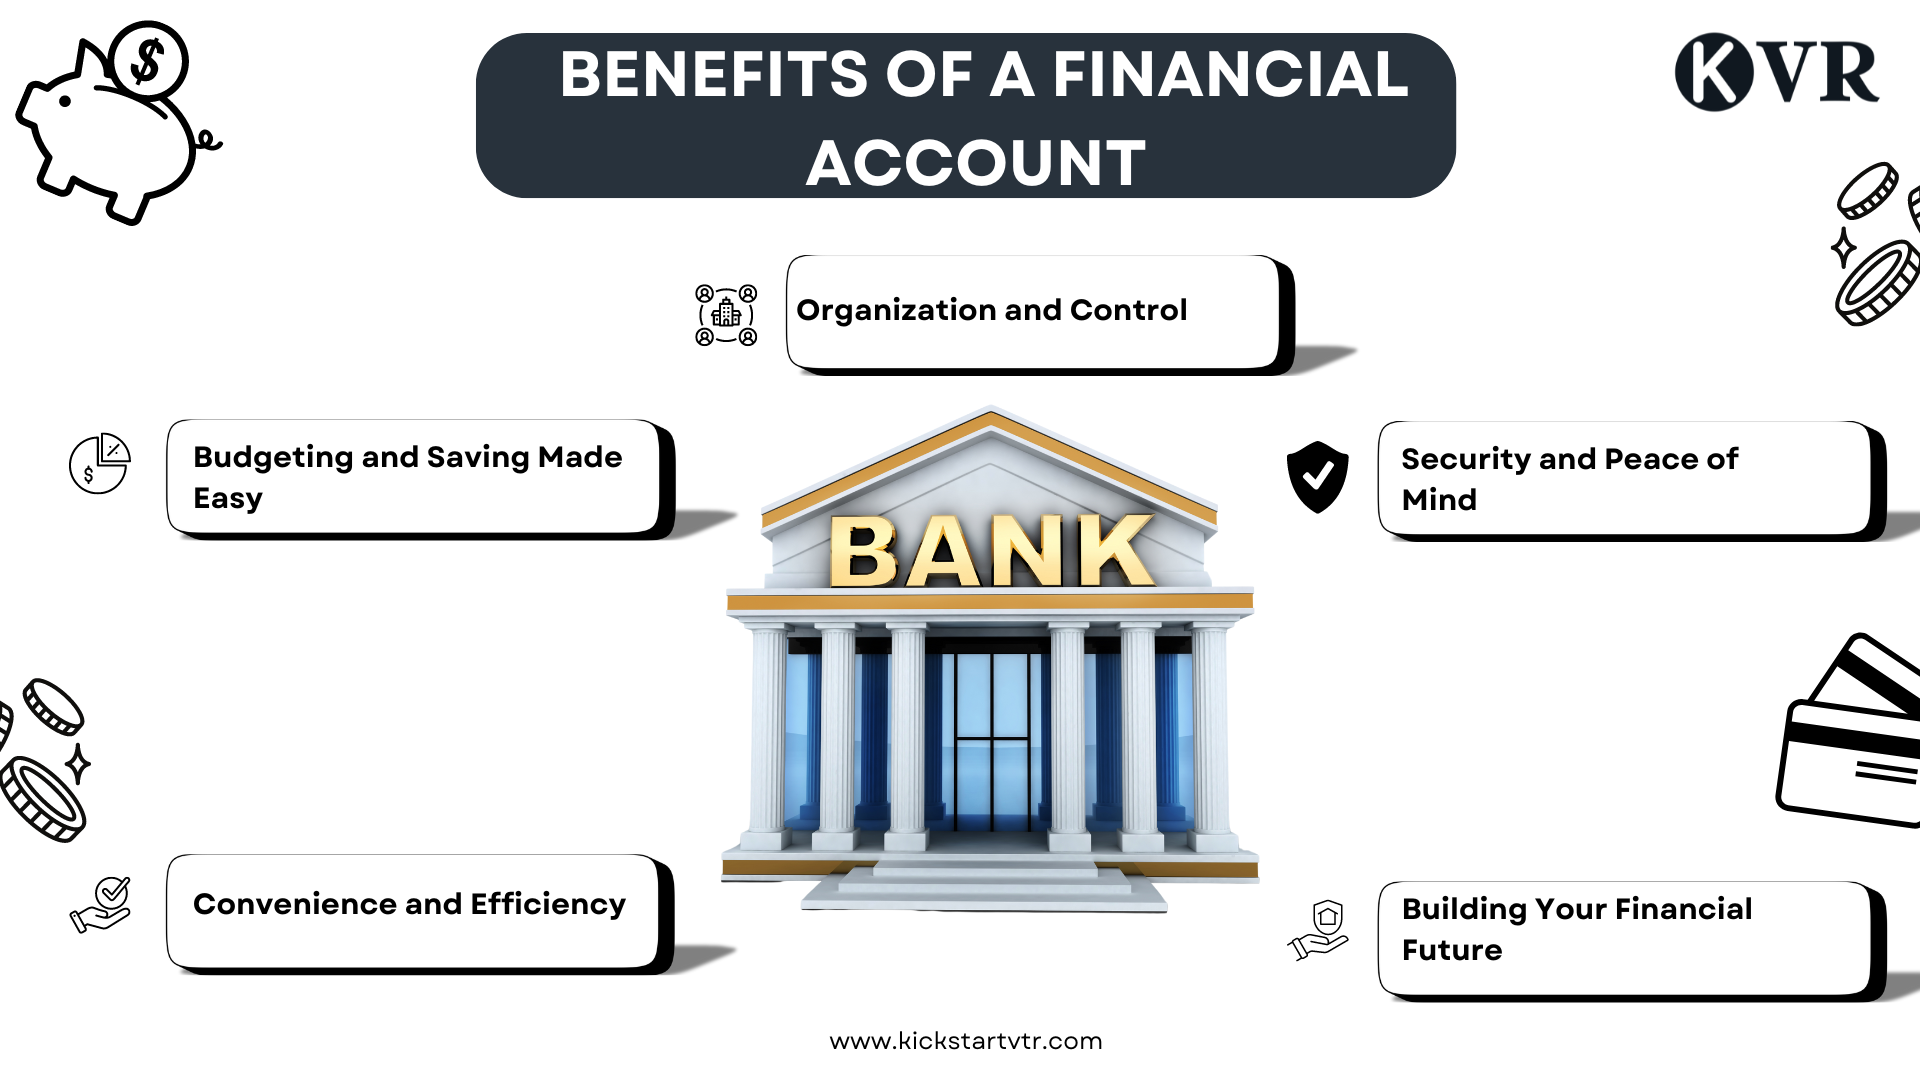 Benefits of a Financial Account